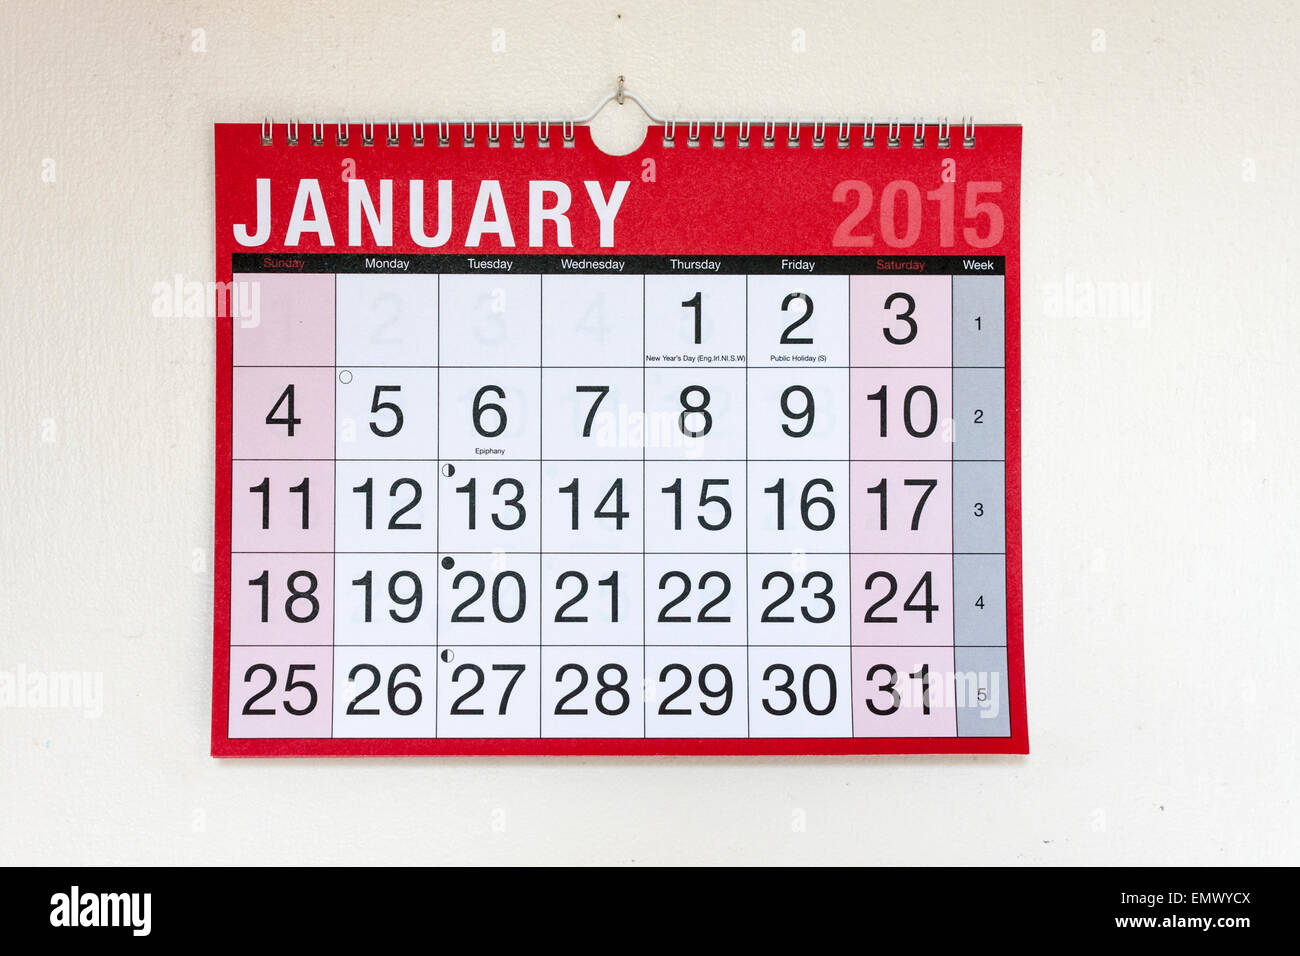 Wall calendar for month of January 2015 Stock Photo